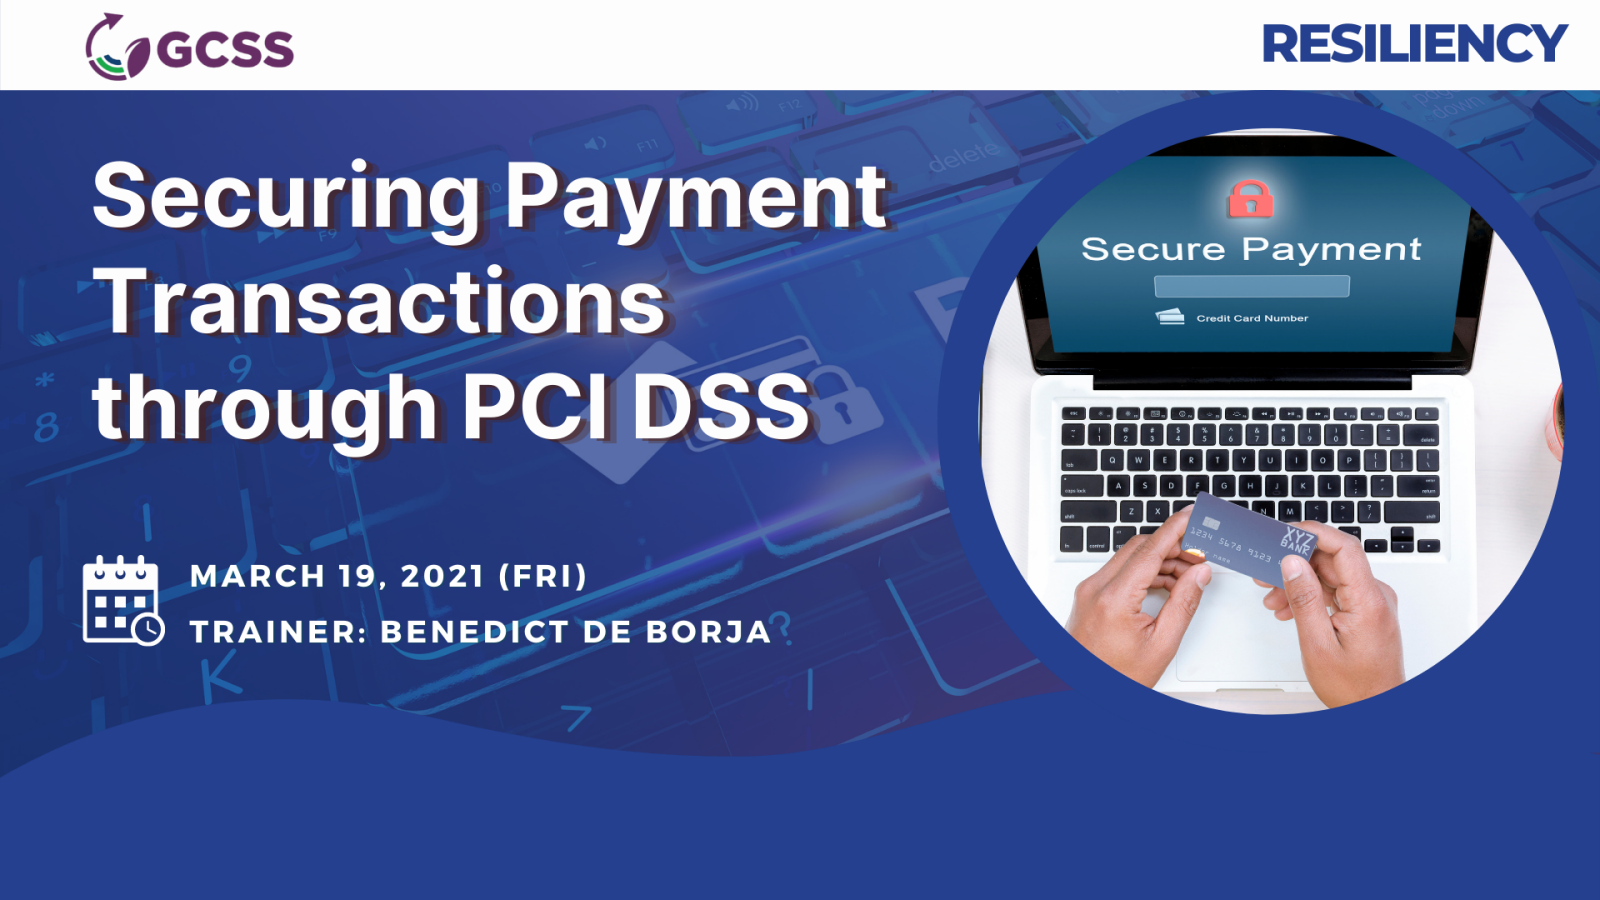 Securing Payment Transactions through PCI DSS, Manila, National Capital Region, Philippines